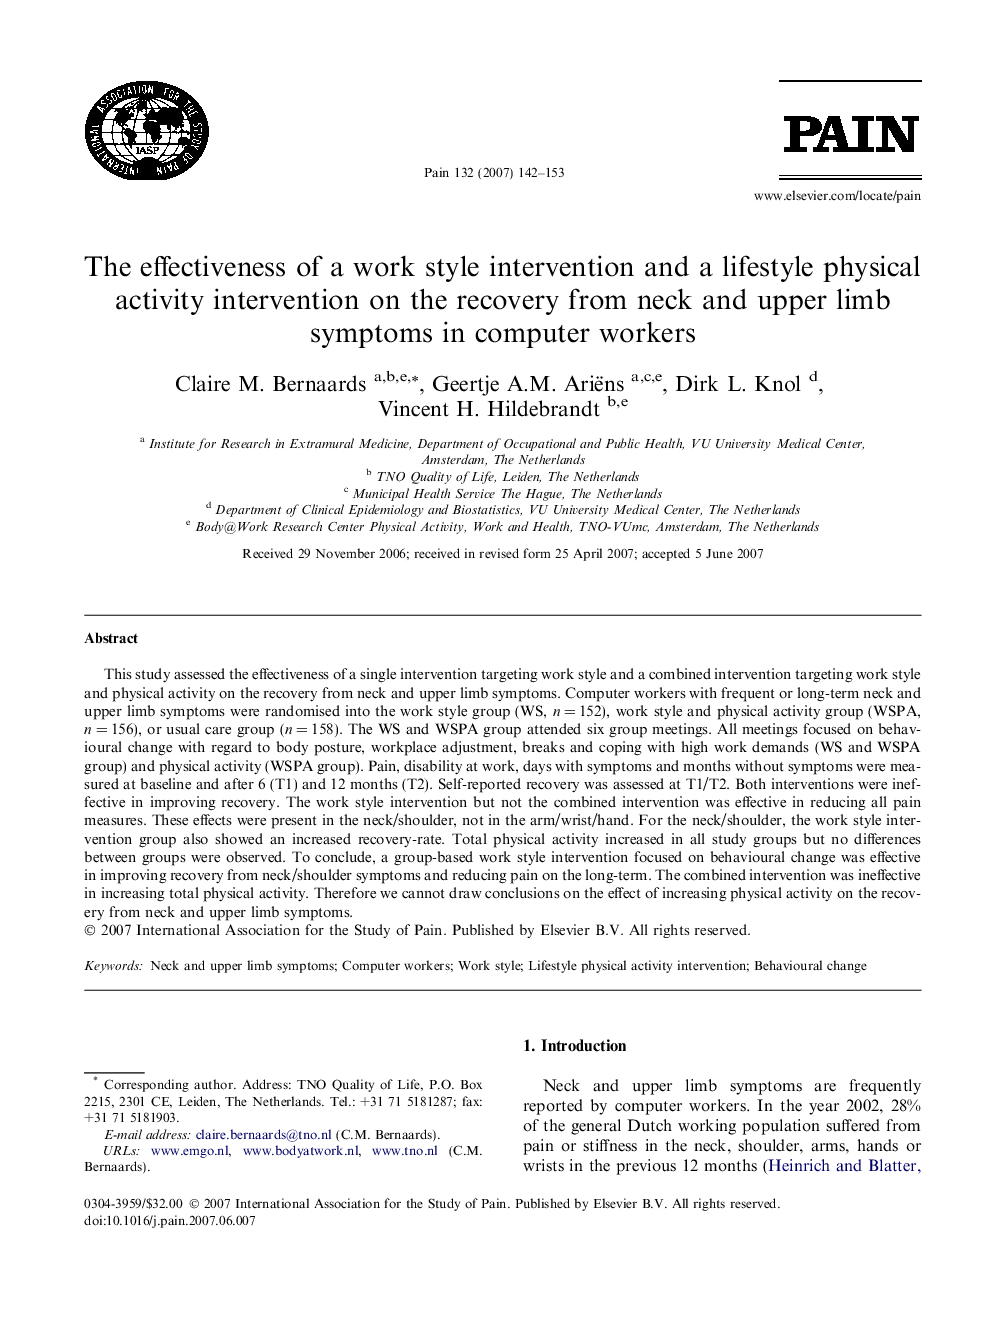 The effectiveness of a work style intervention and a lifestyle physical activity intervention on the recovery from neck and upper limb symptoms in computer workers